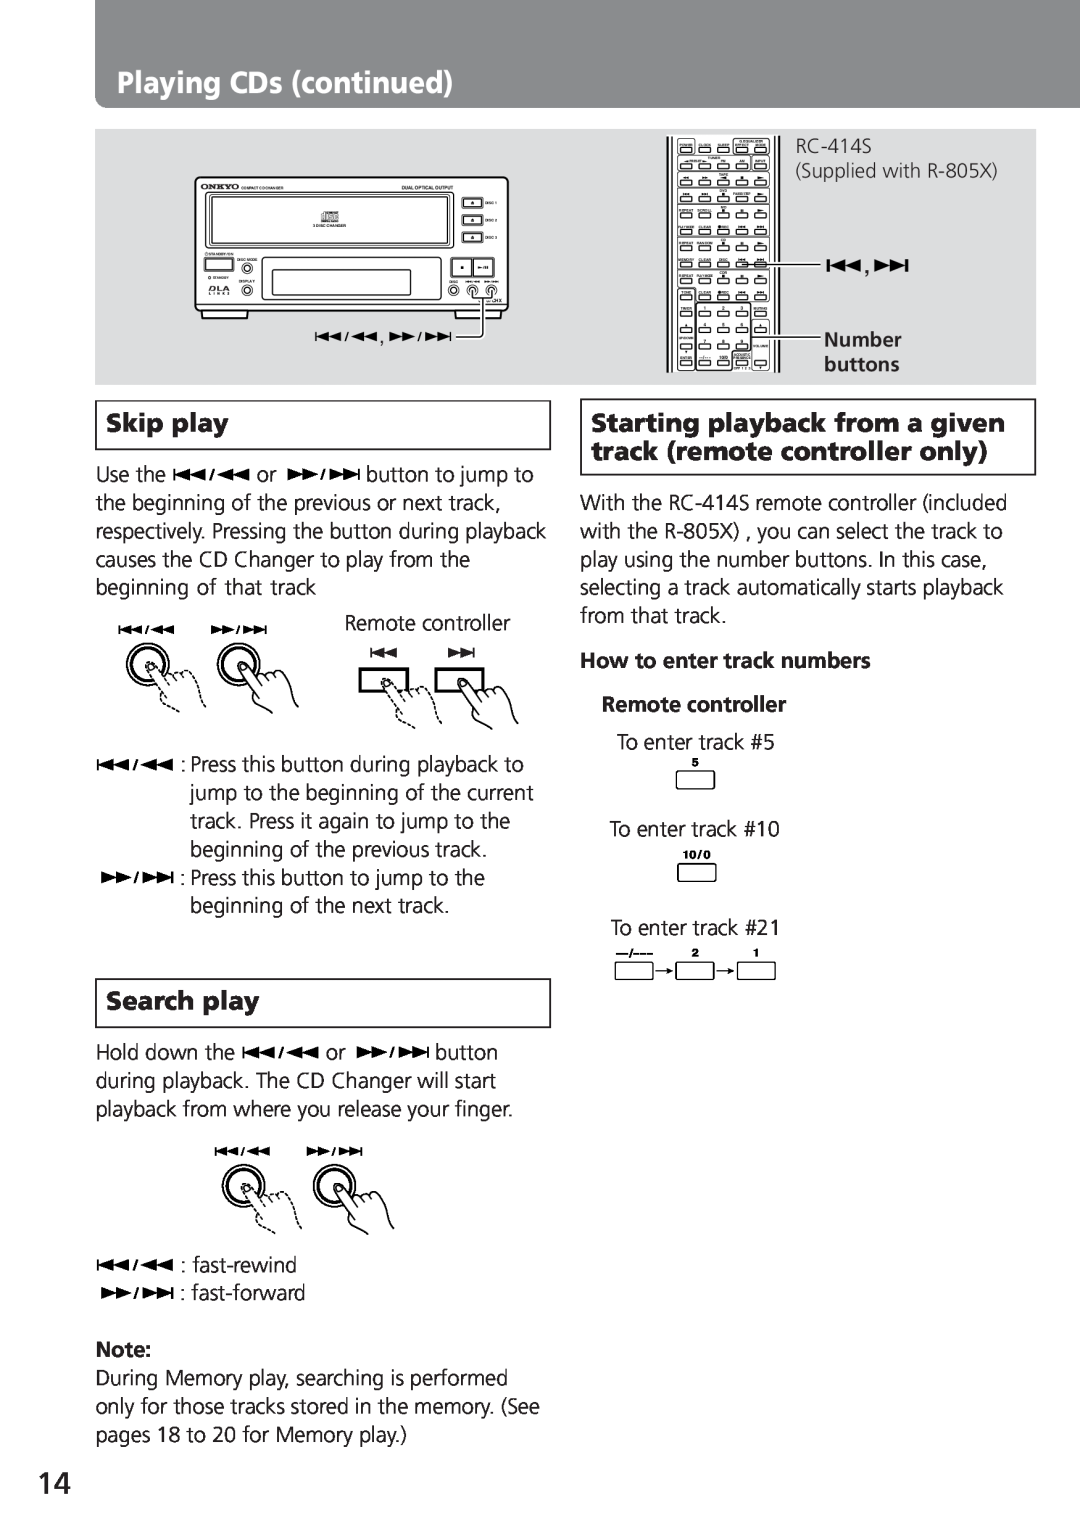 Onkyo C-707CHX instruction manual Playing CDs continued, Skip play, Search play 